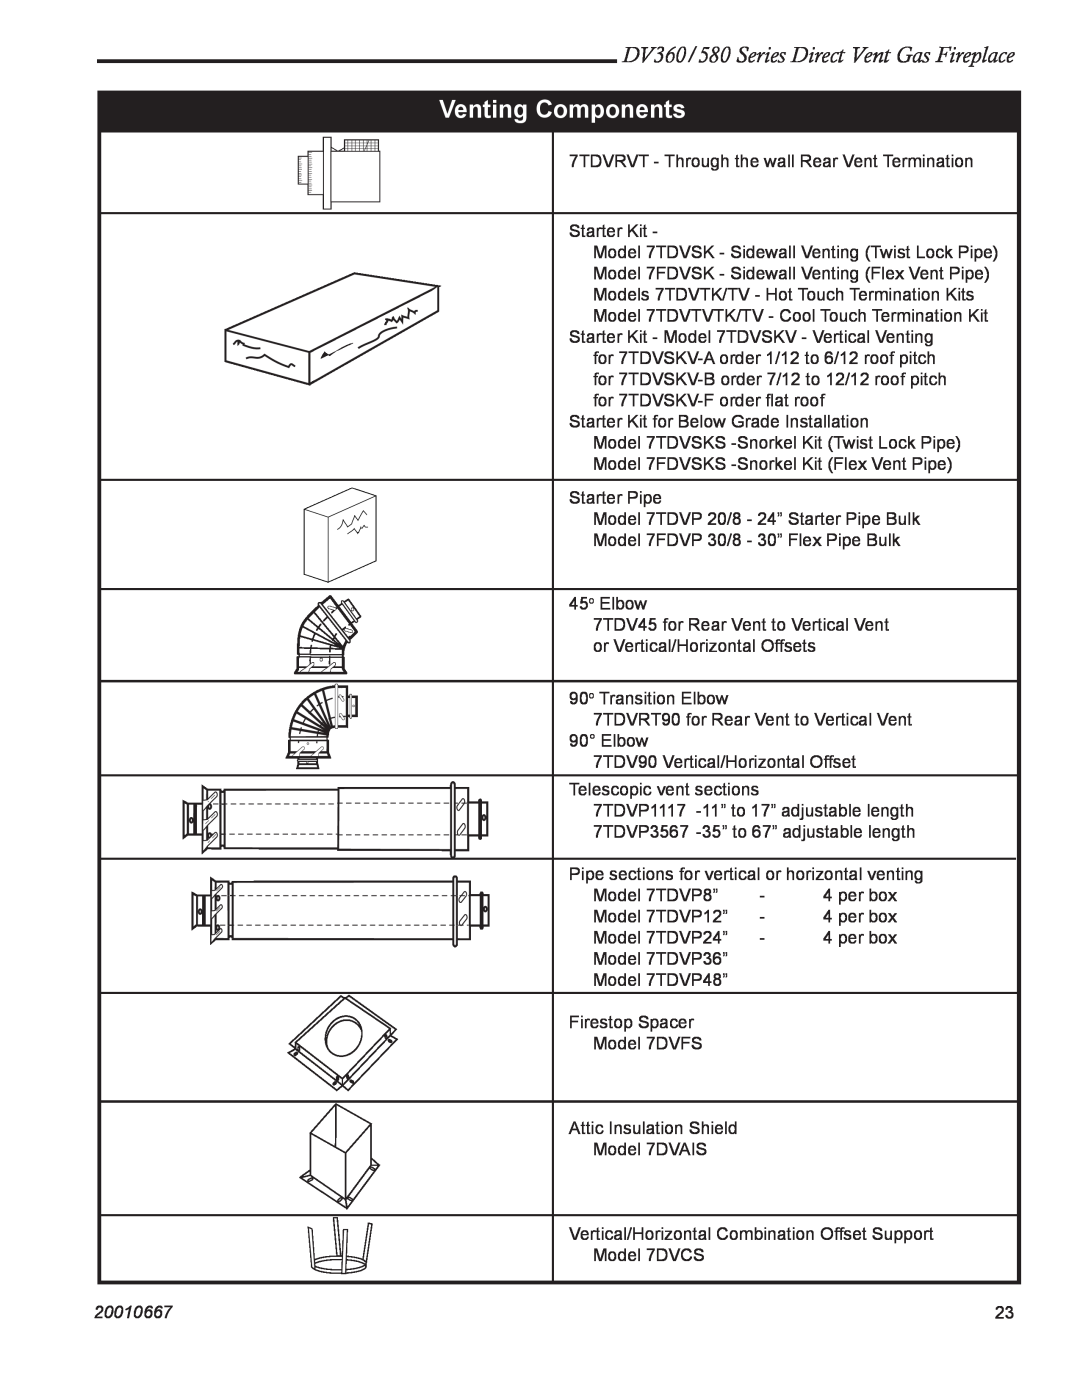 Vermont Casting DV580 manual Venting Components, DV360/580 Series Direct Vent Gas Fireplace, 20010667 